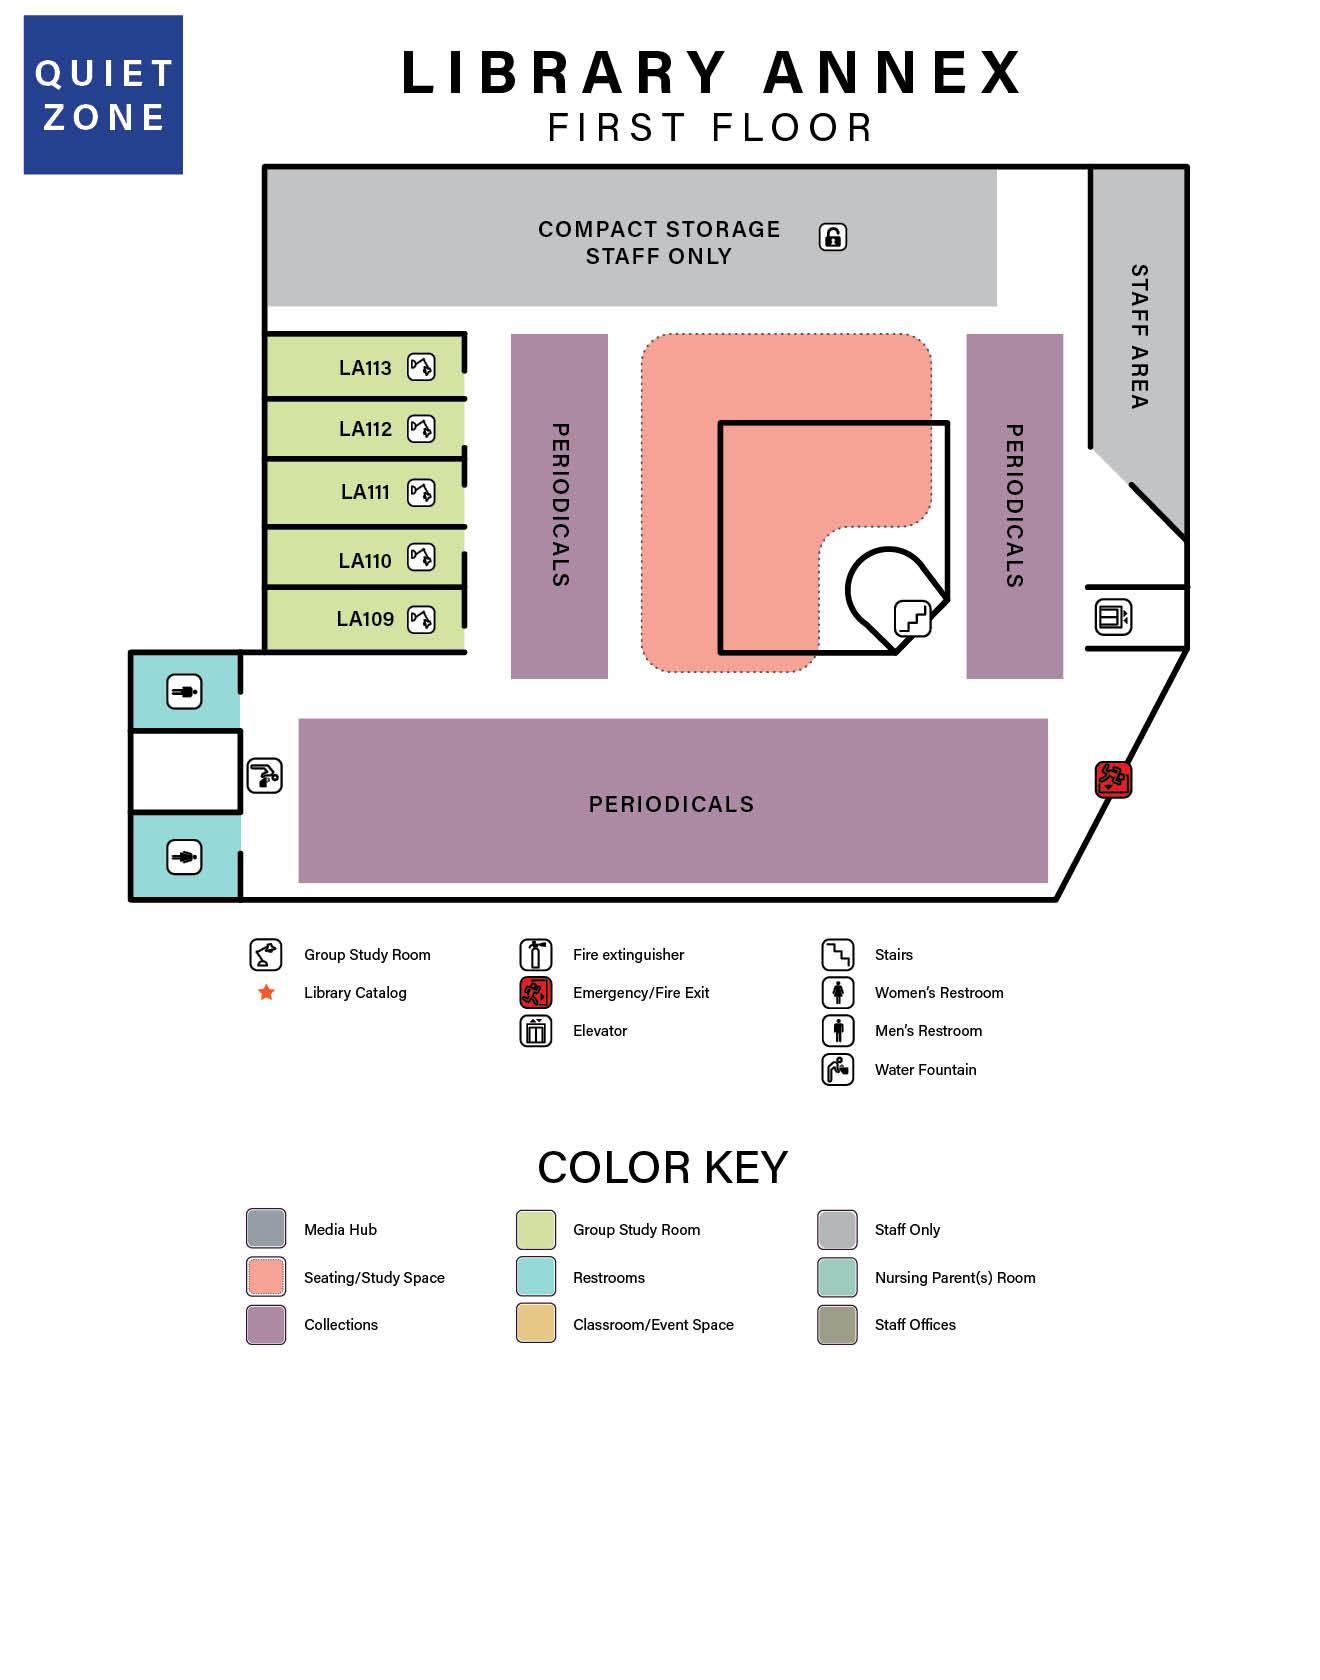 a floor map of of the library annex first floor, which shows room numbers, and space names. 